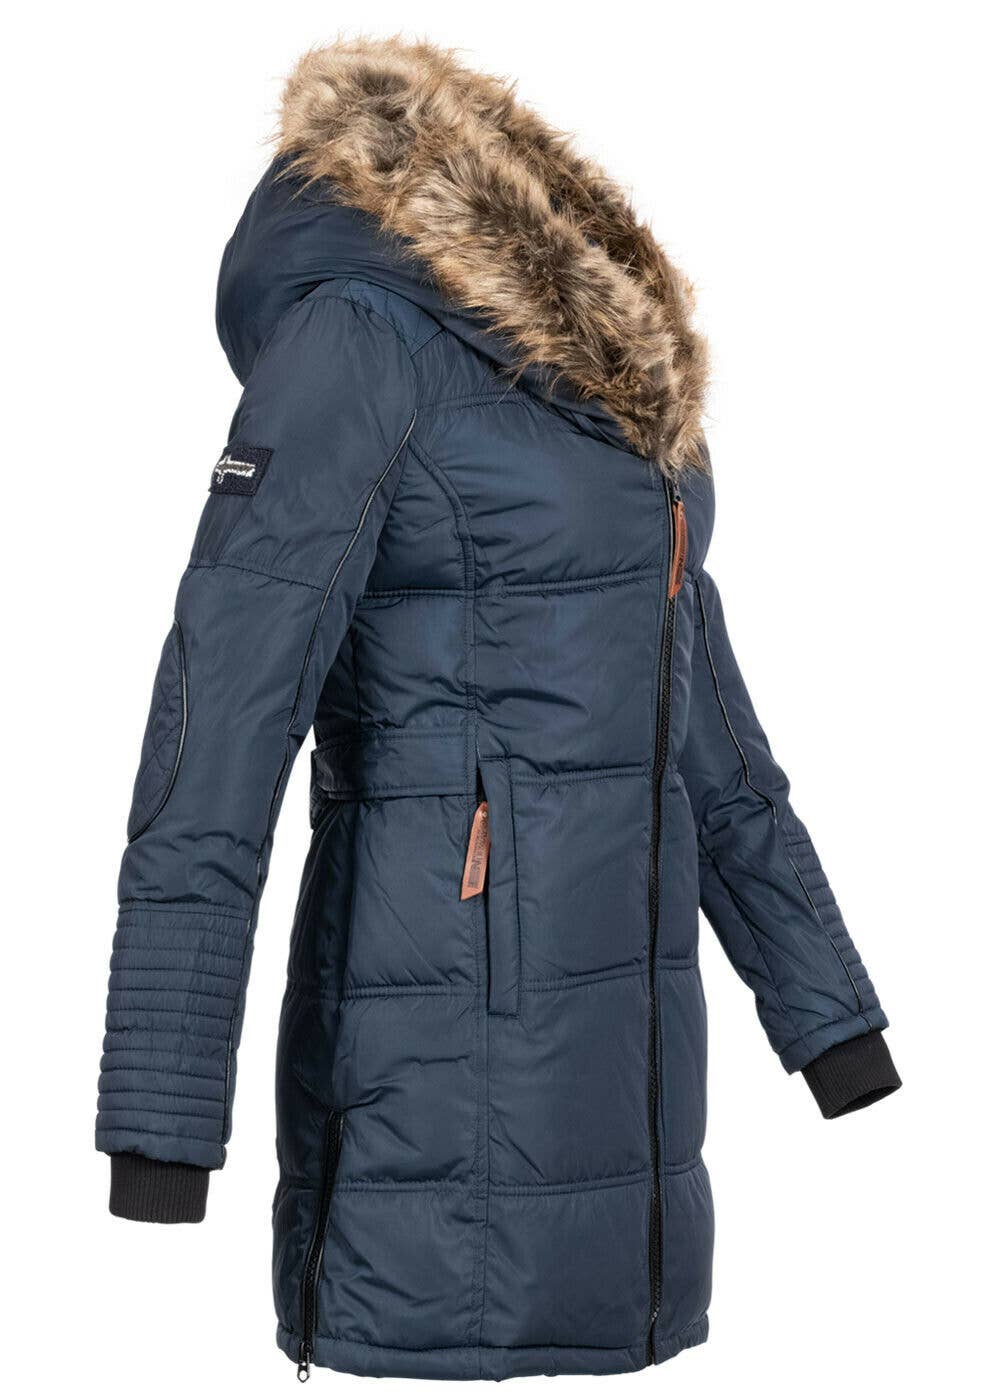 Women’s Geographical Norway Navy Parka